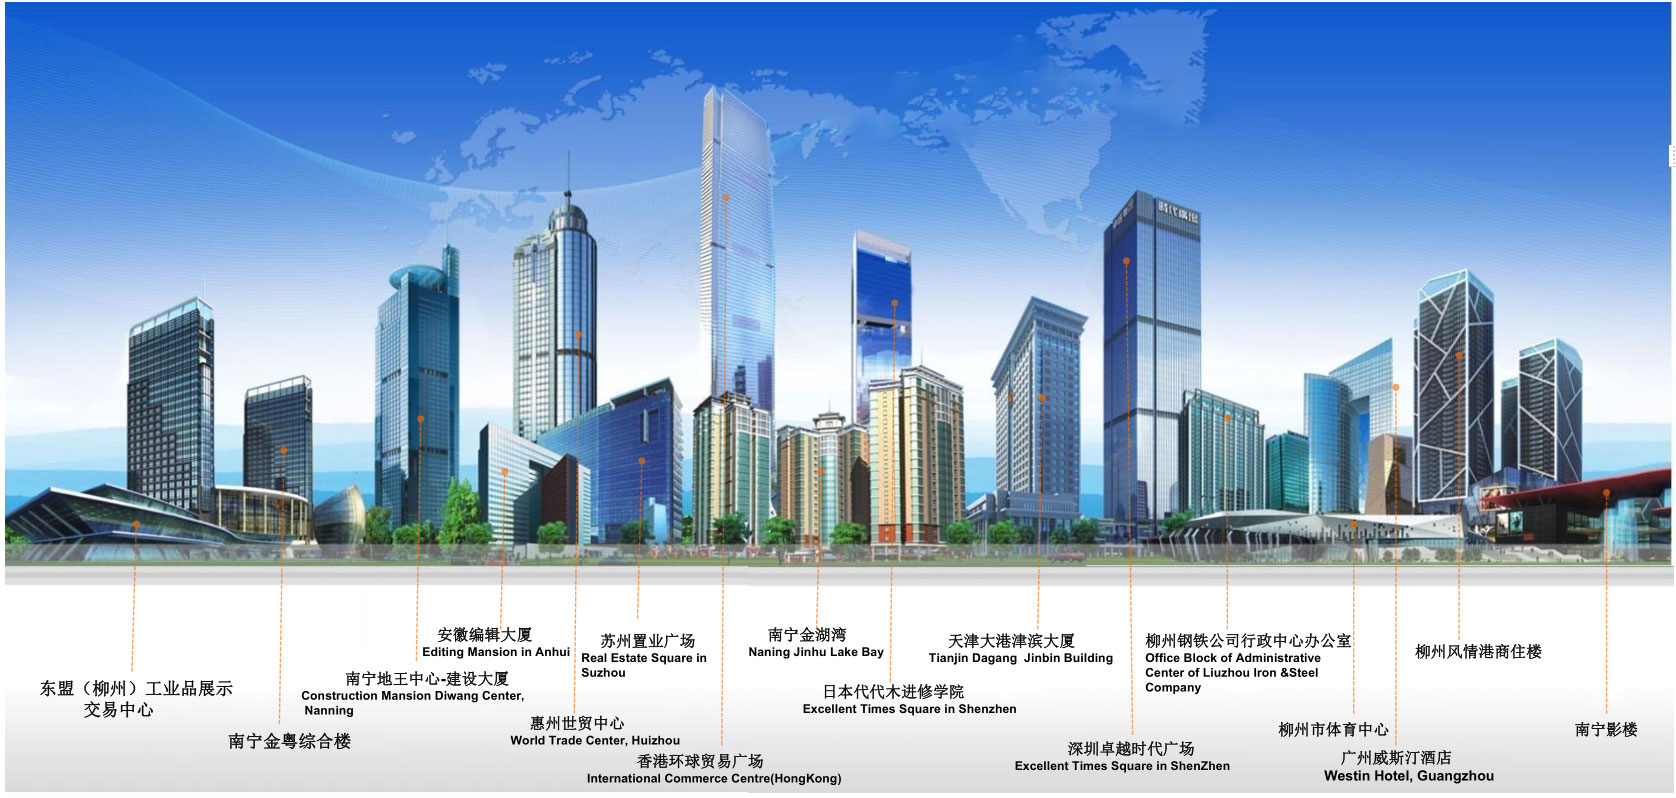 0.Overview of Curtain wall Projects